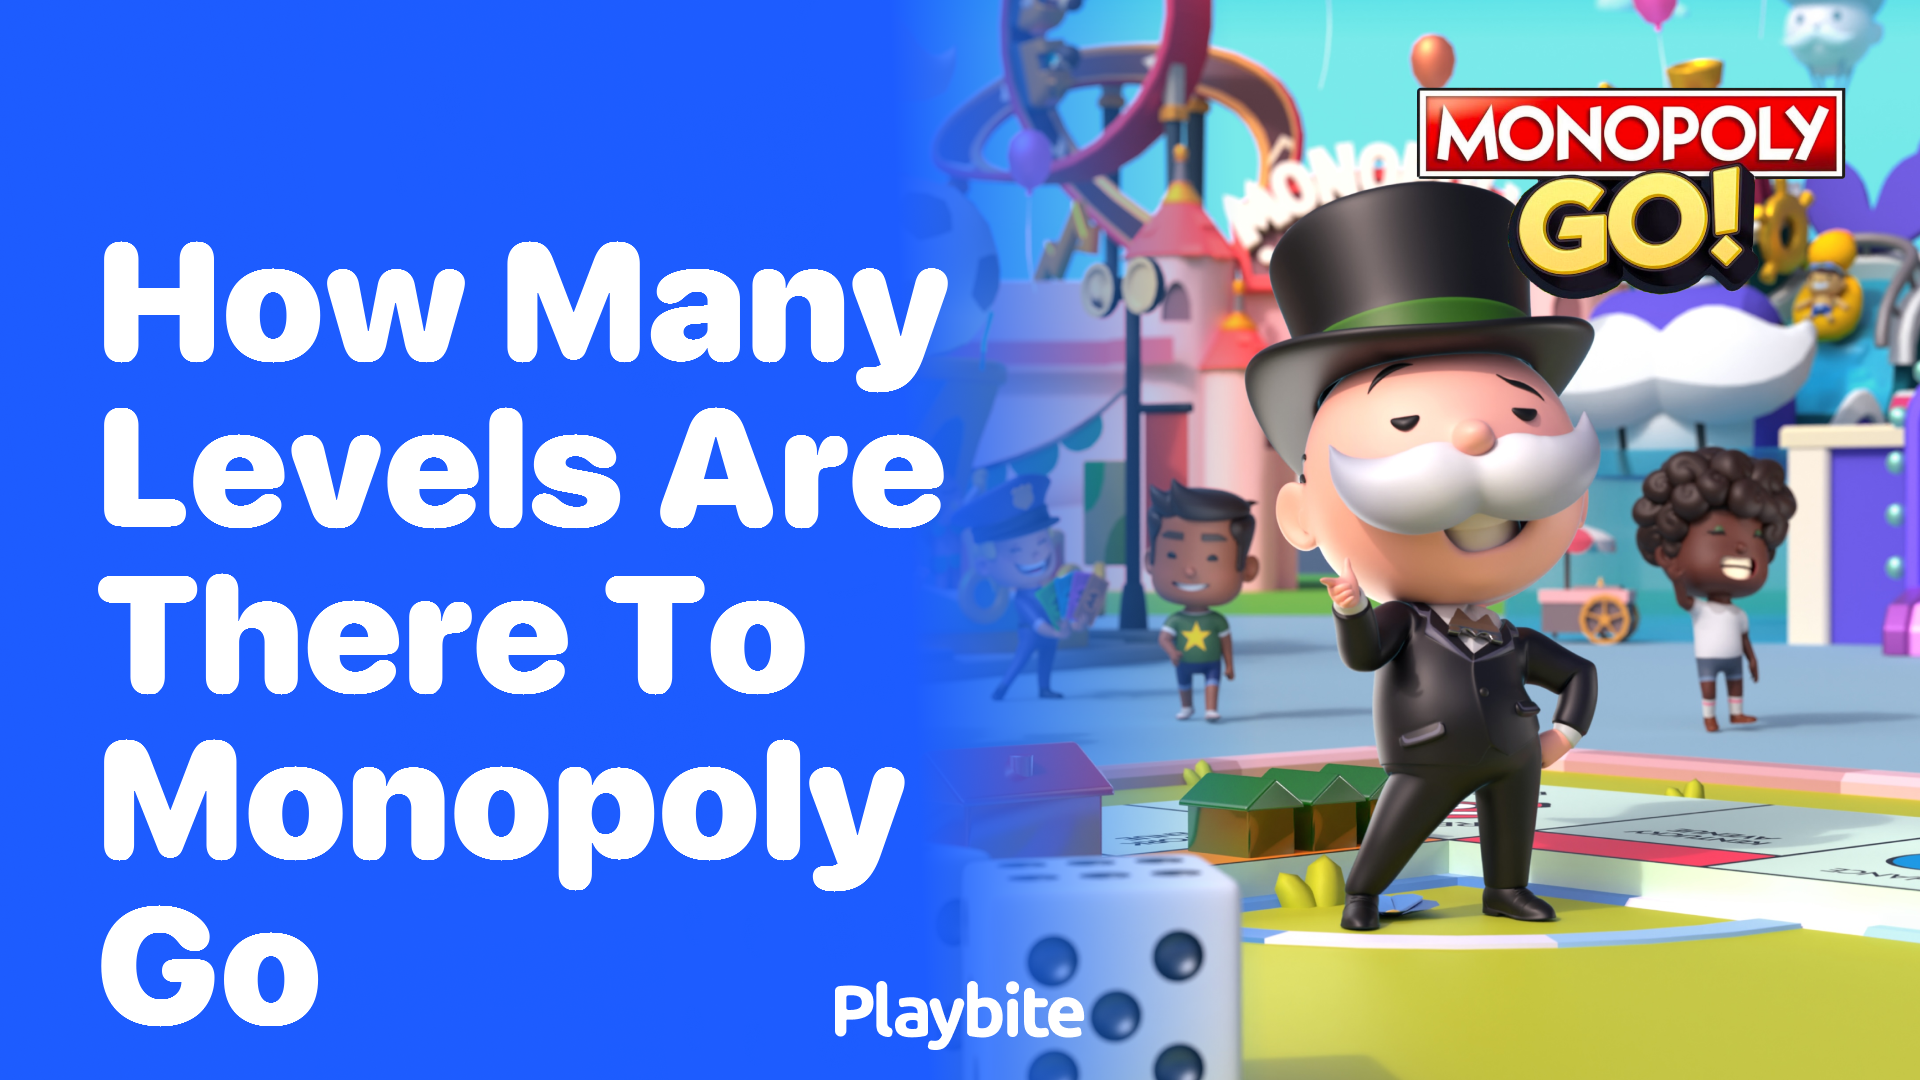 How Many Levels Are There in Monopoly Go?